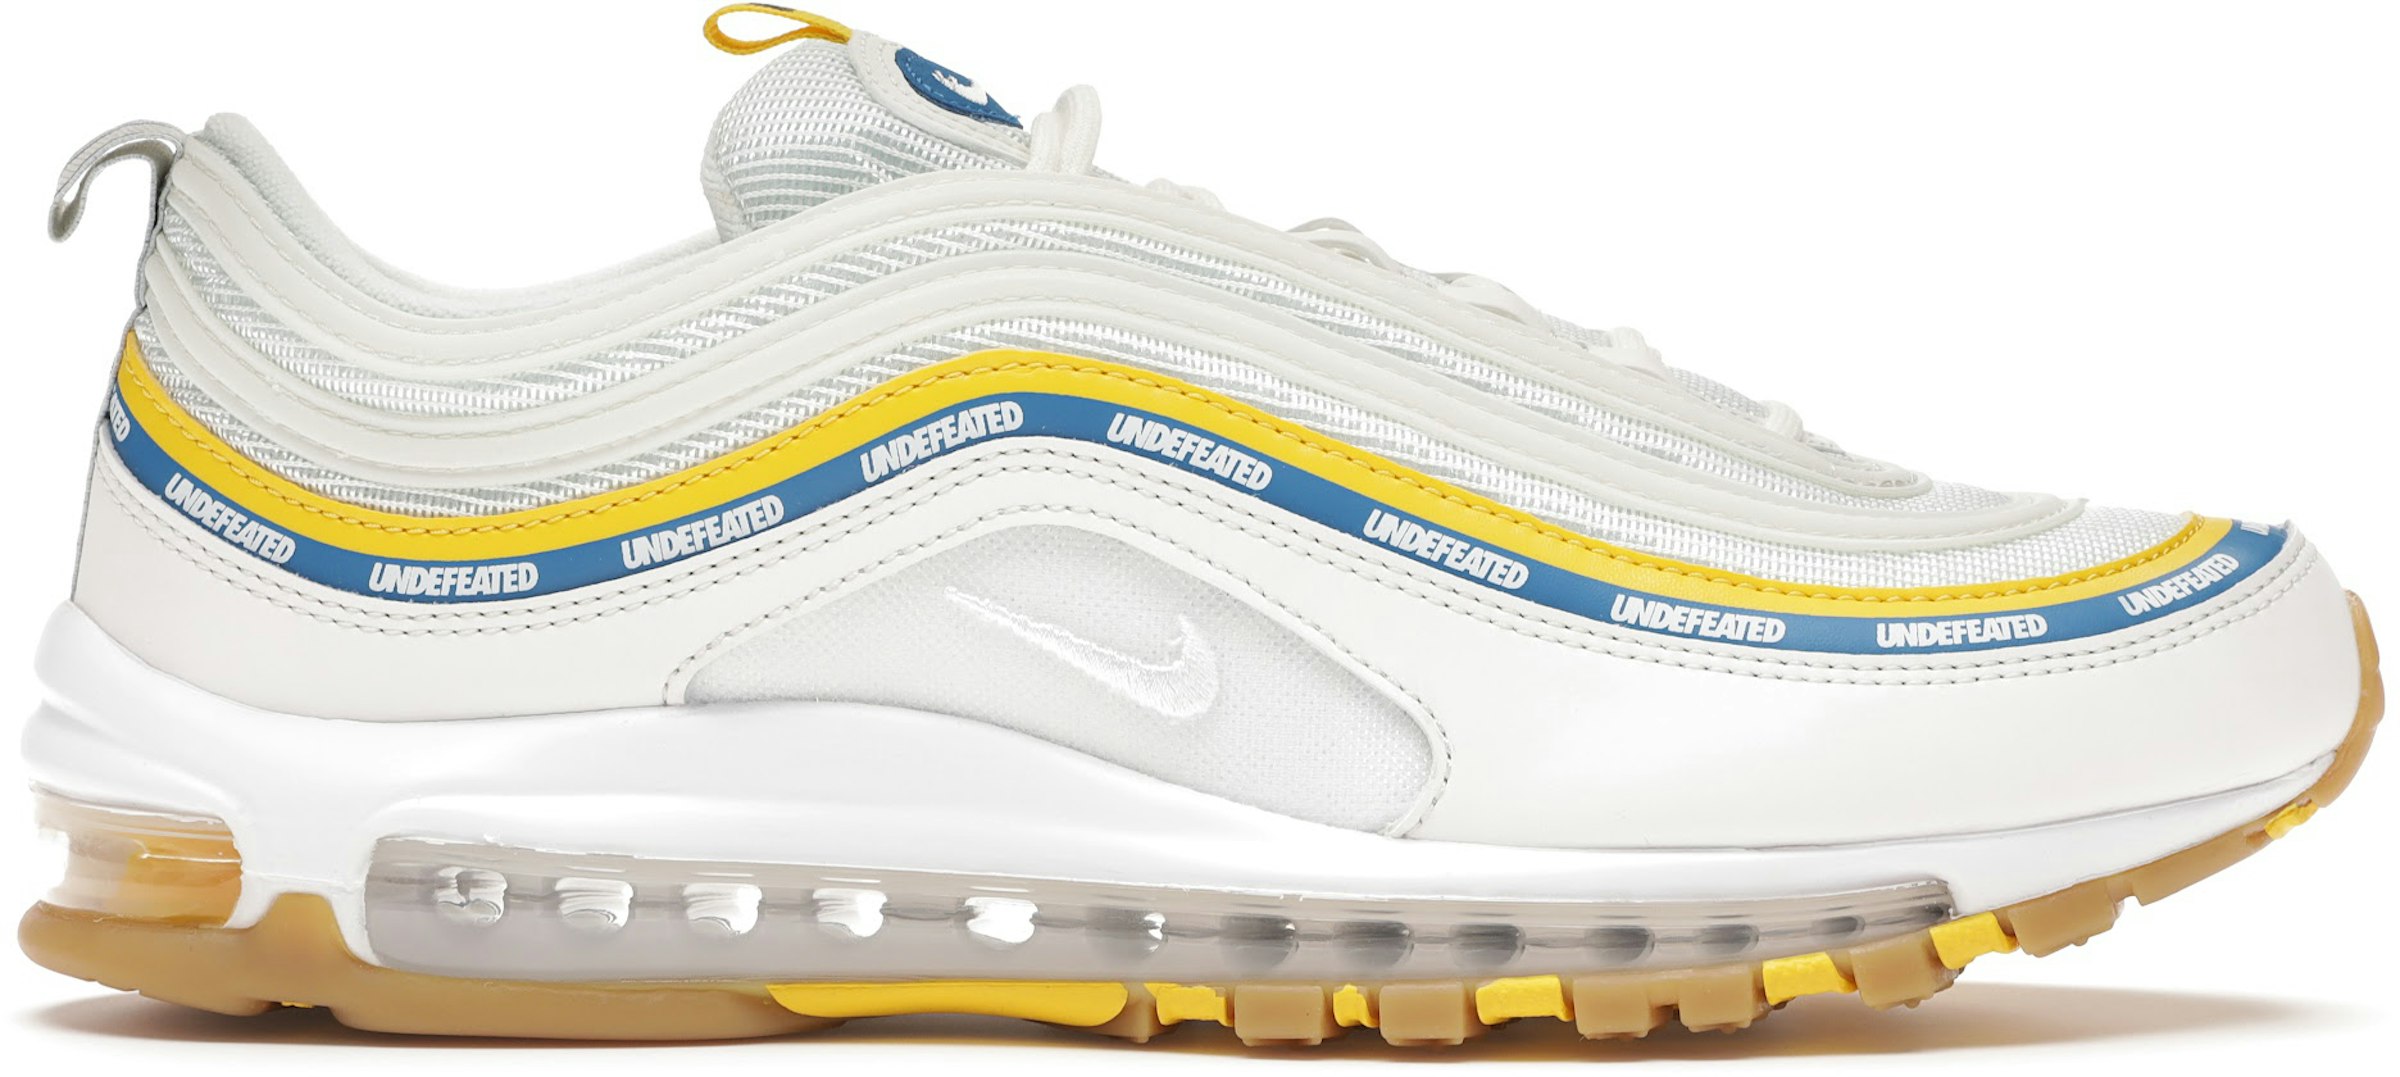 Nike Air Max 97 Undefeated UCLA - DC4830-100 US